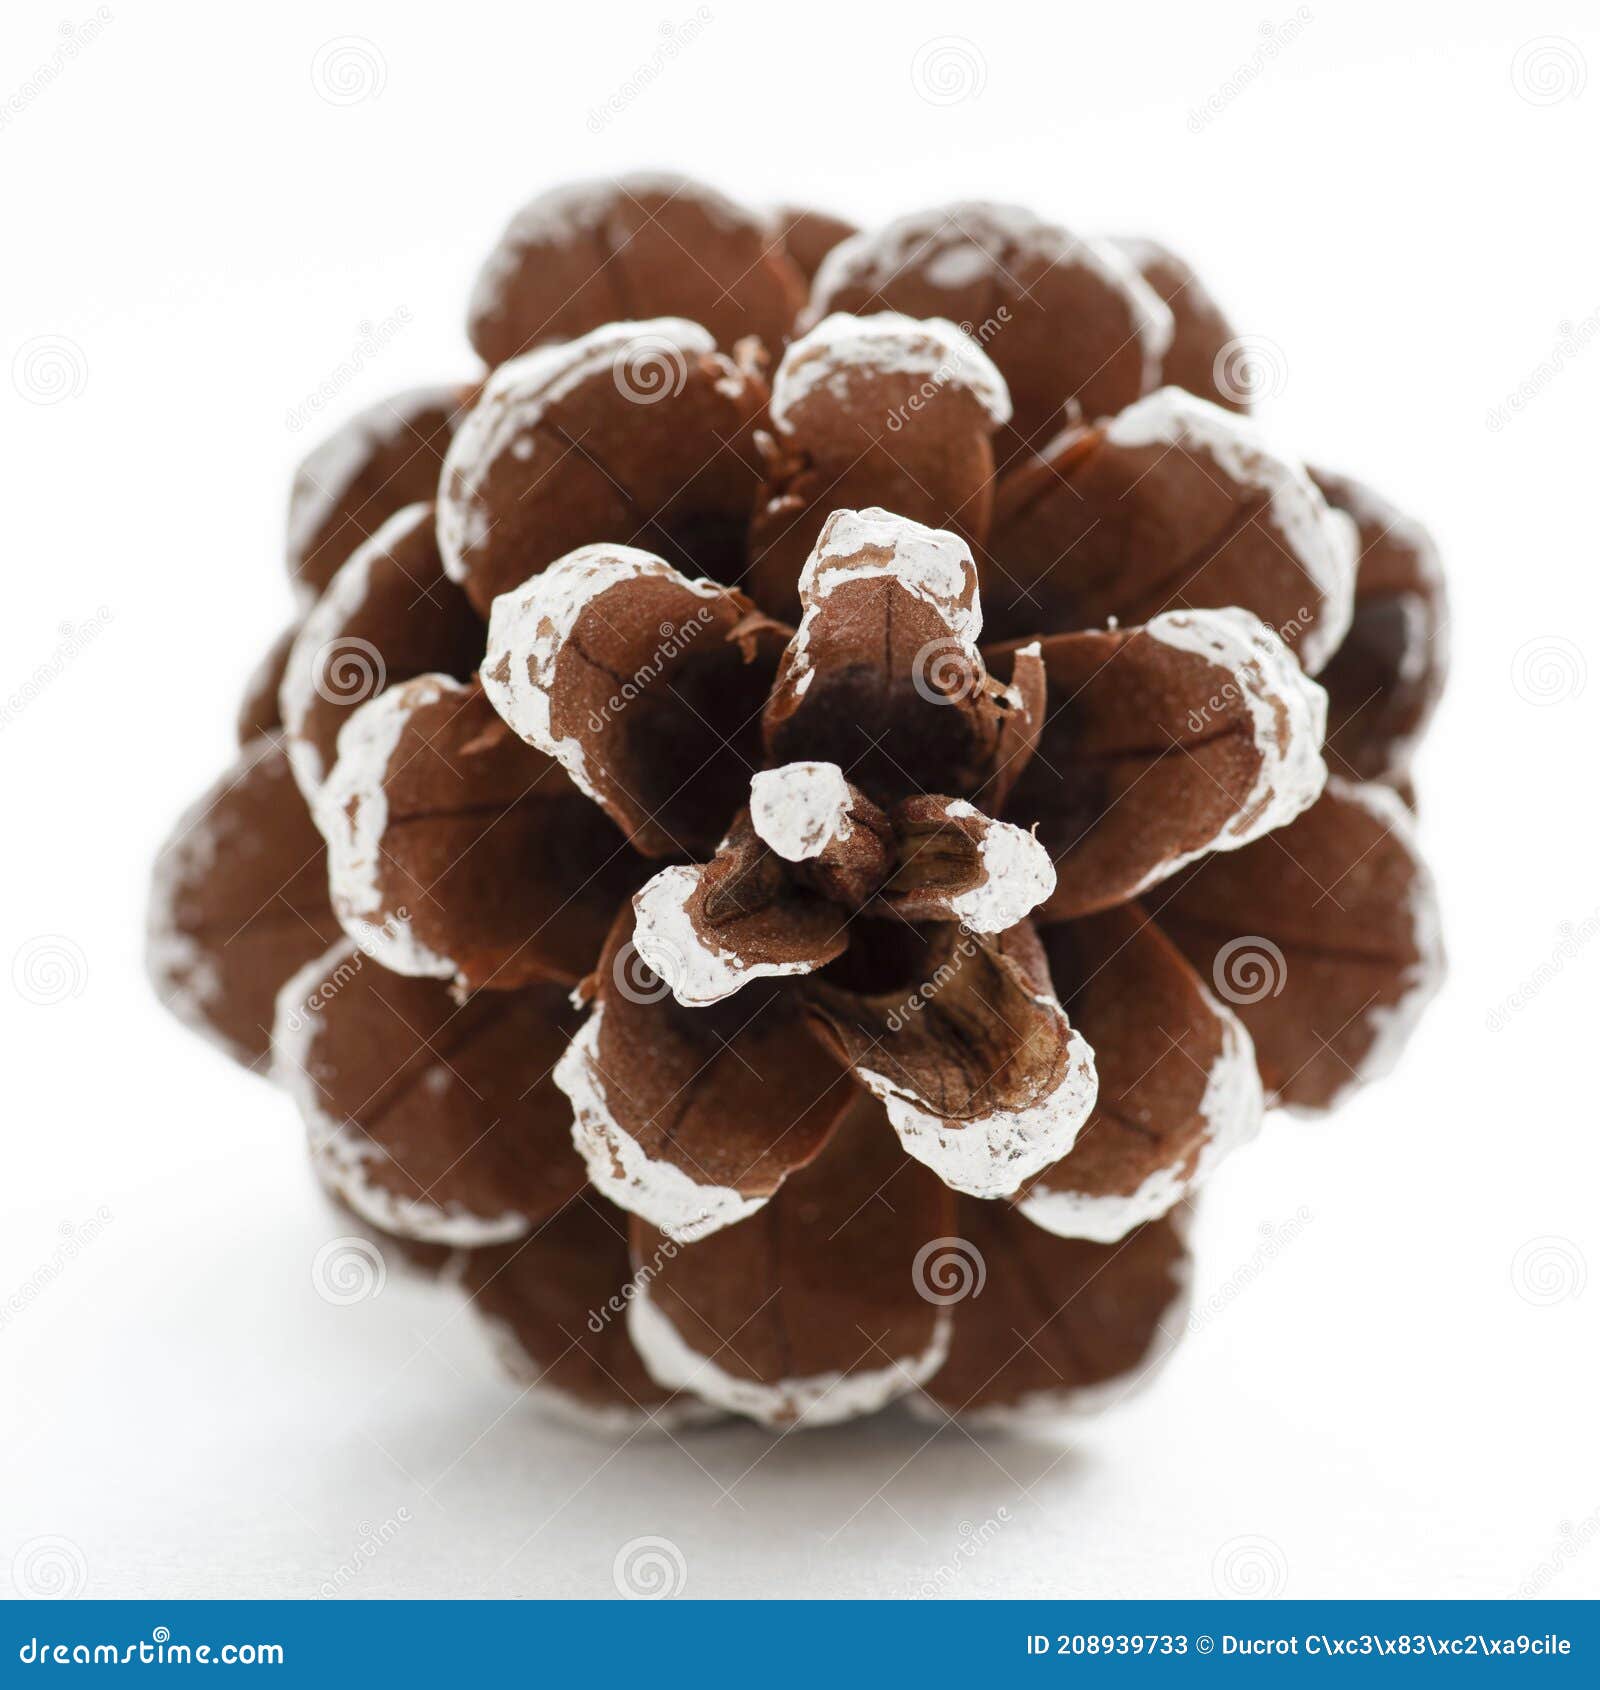 Premium Photo  A growing ripe small pine cones close-up